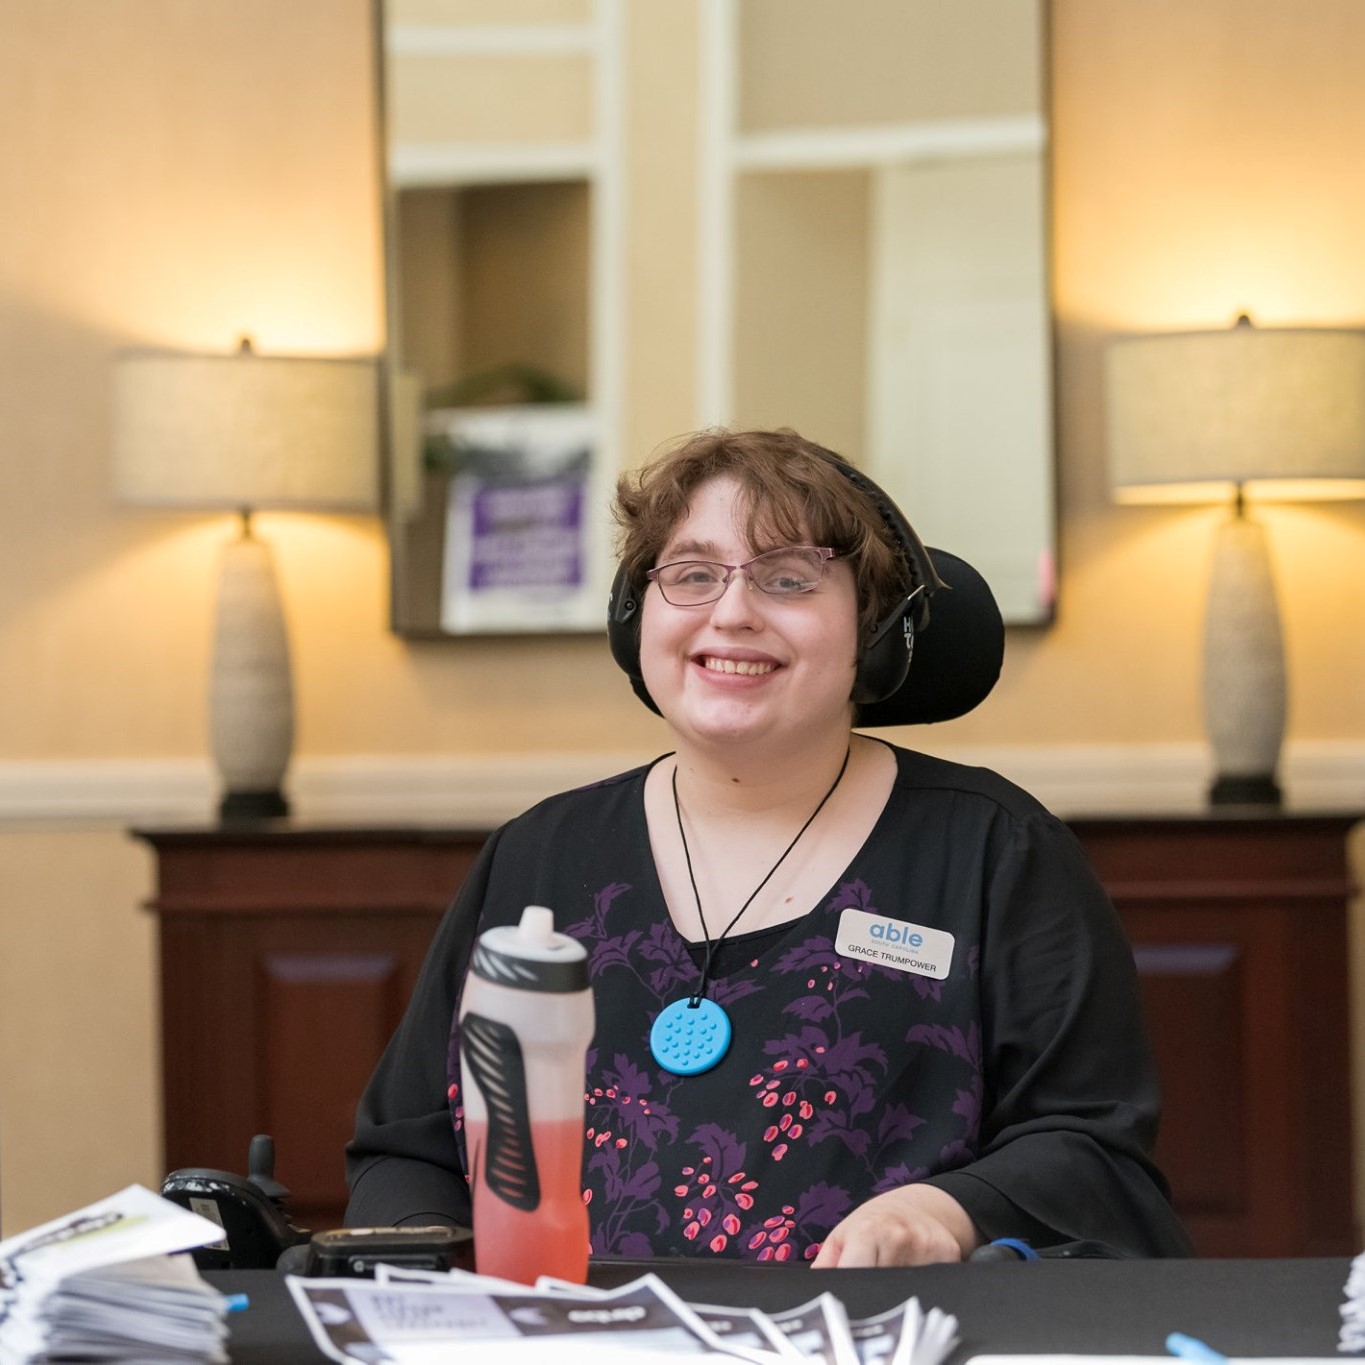 Grace wears glasses, headphones, and a black top while smiling and sitting in a wheelchair behind a vendor table.